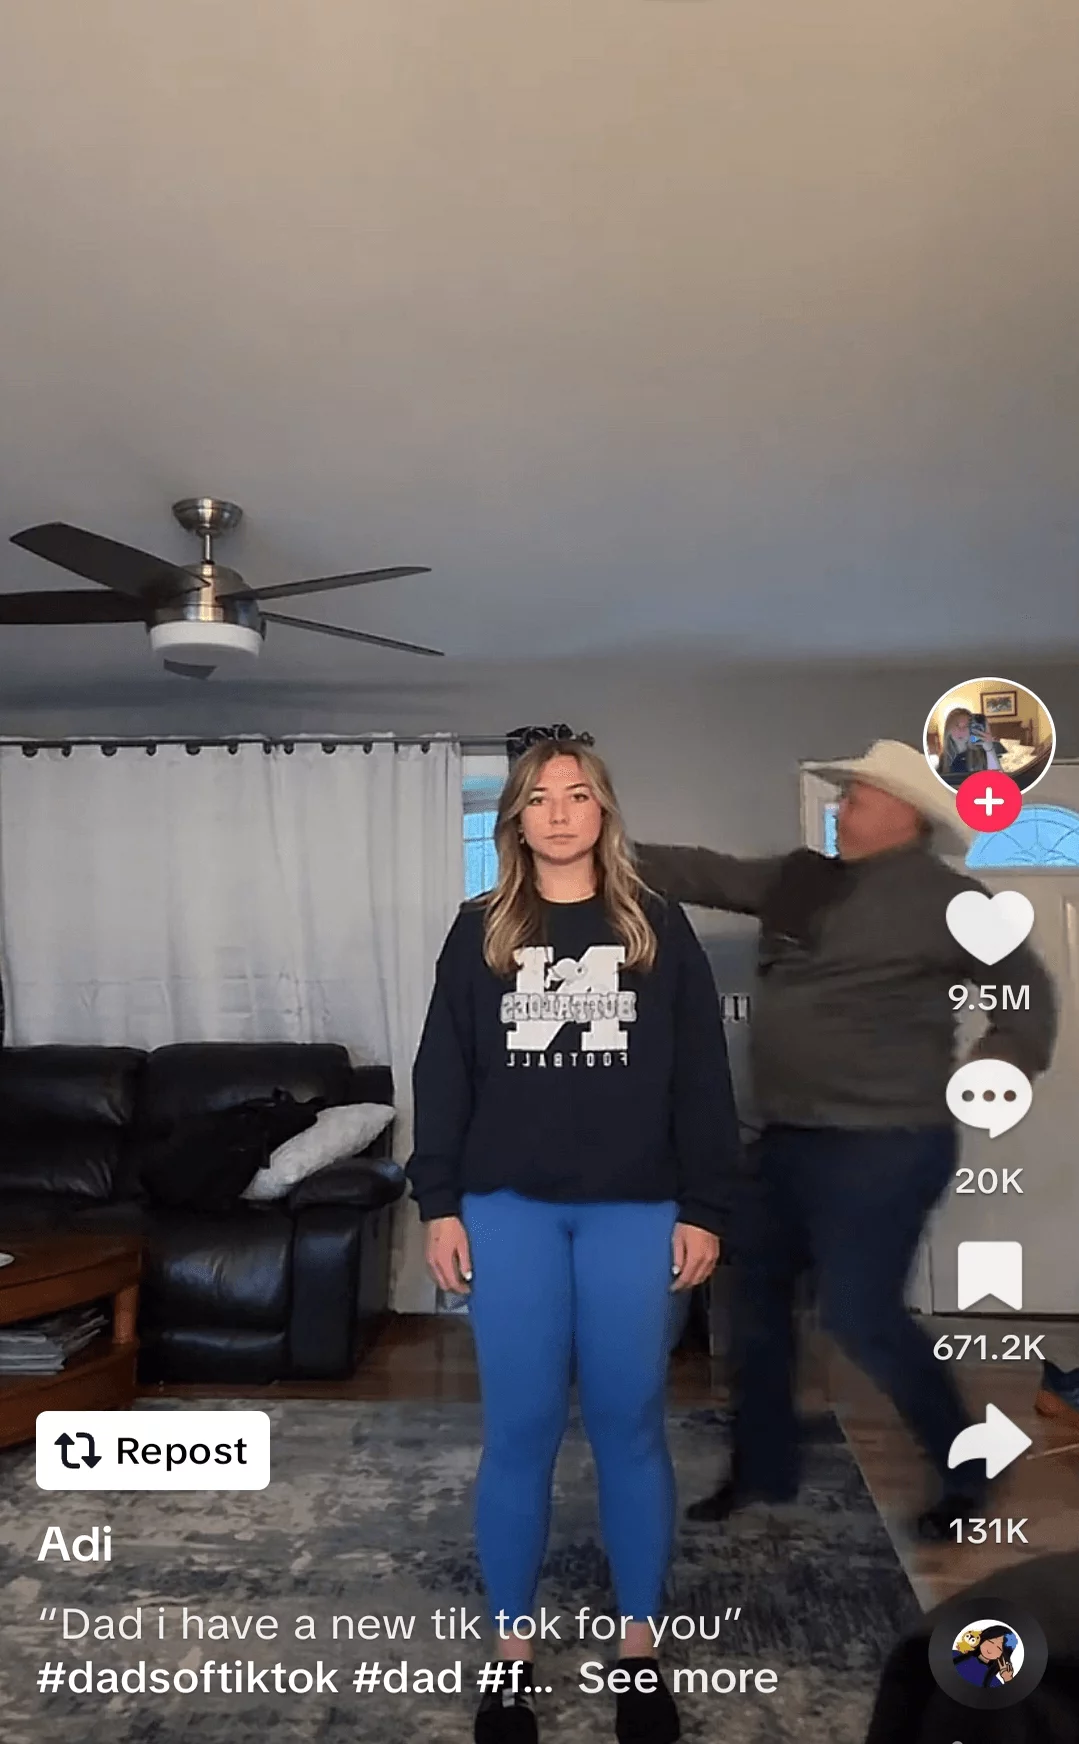 Young woman in casual attire standing in living room, with an older man playfully adjusting her headband, captured in a TikTok video.